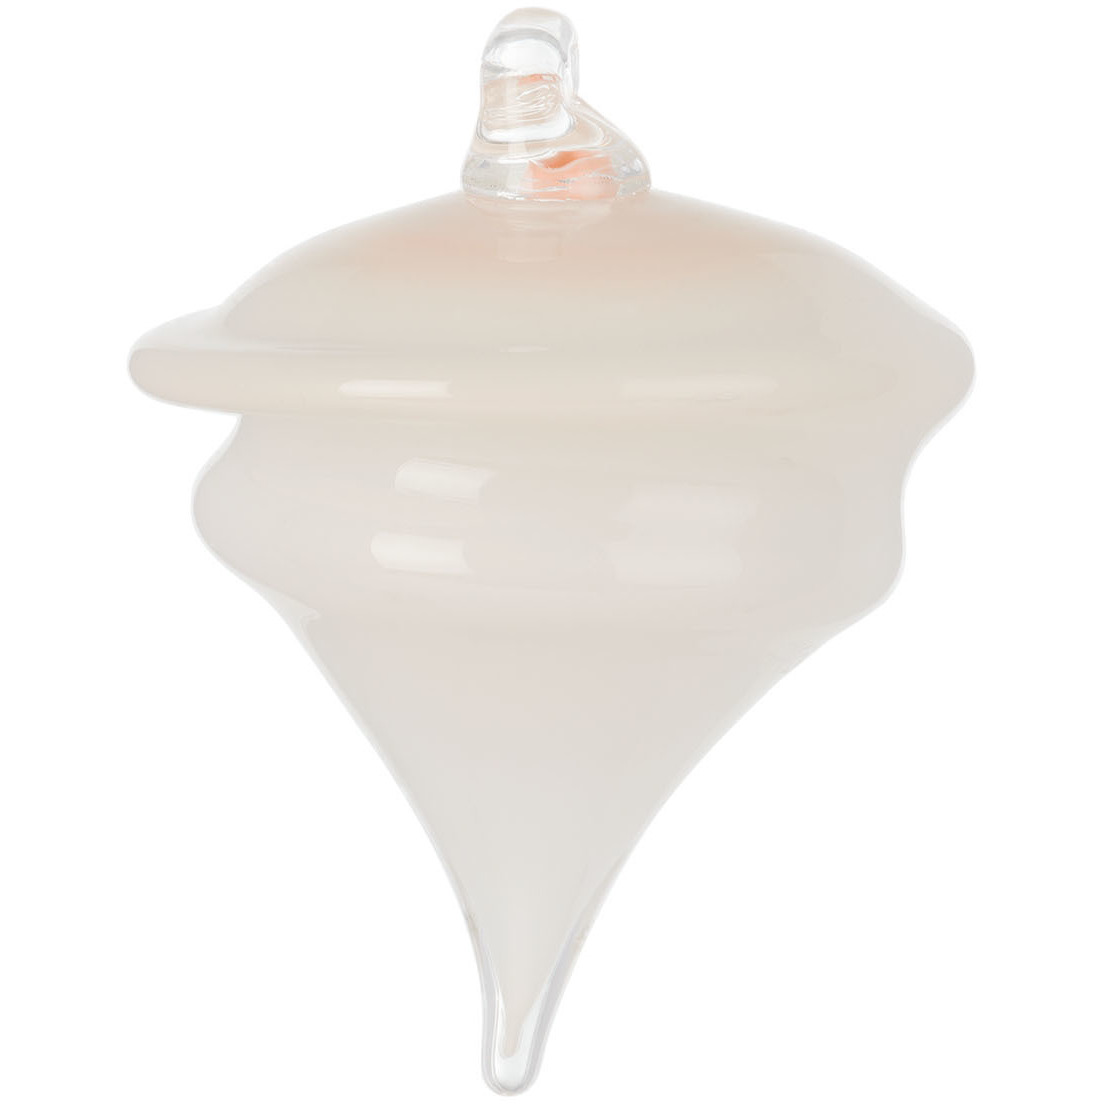 Sticky Glass SSENSE Exclusive Pink Deflated Ornament - image 1